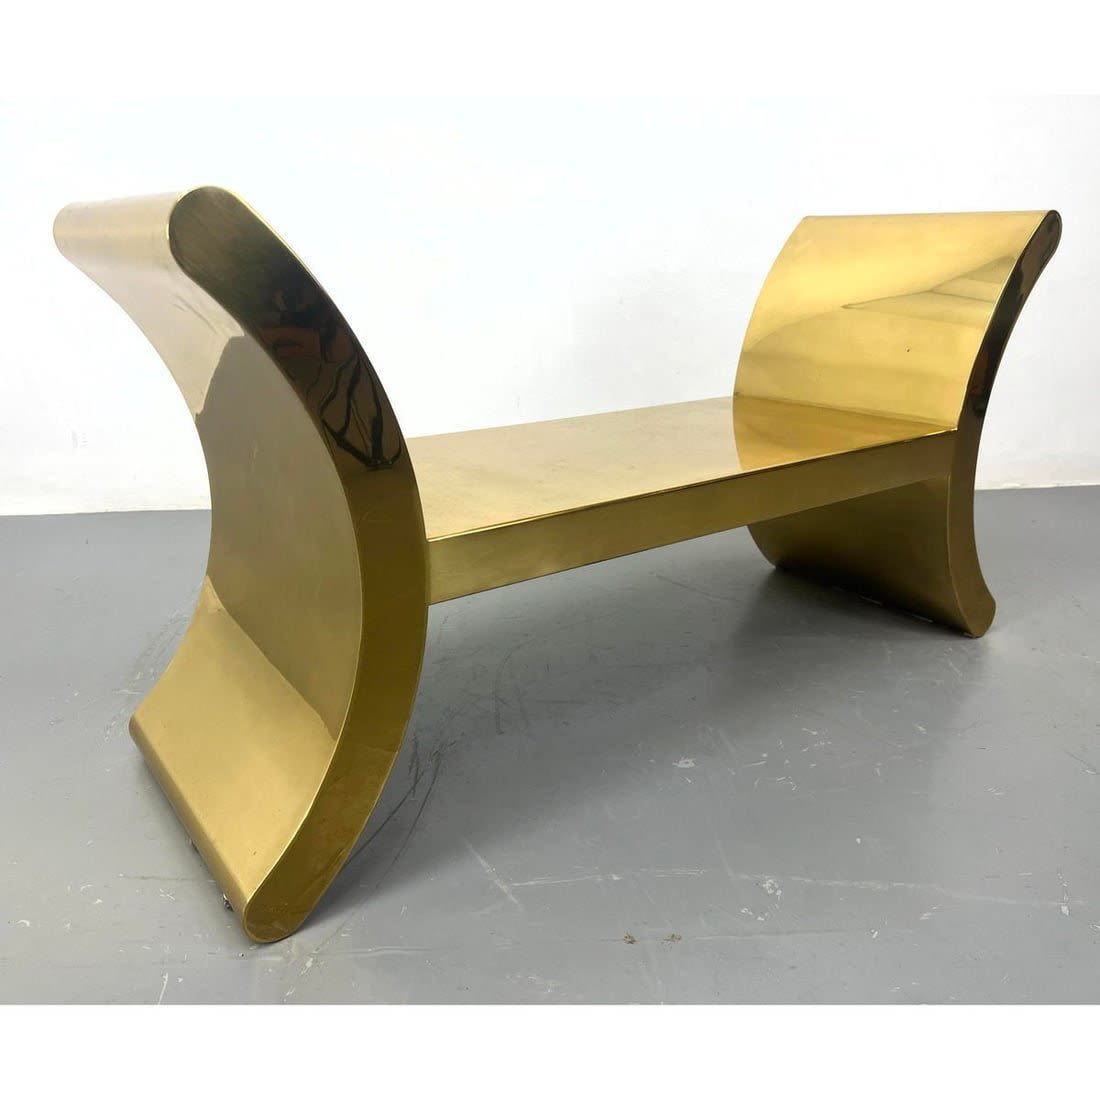 RON SEFF Highly Polished Brass 362a2d